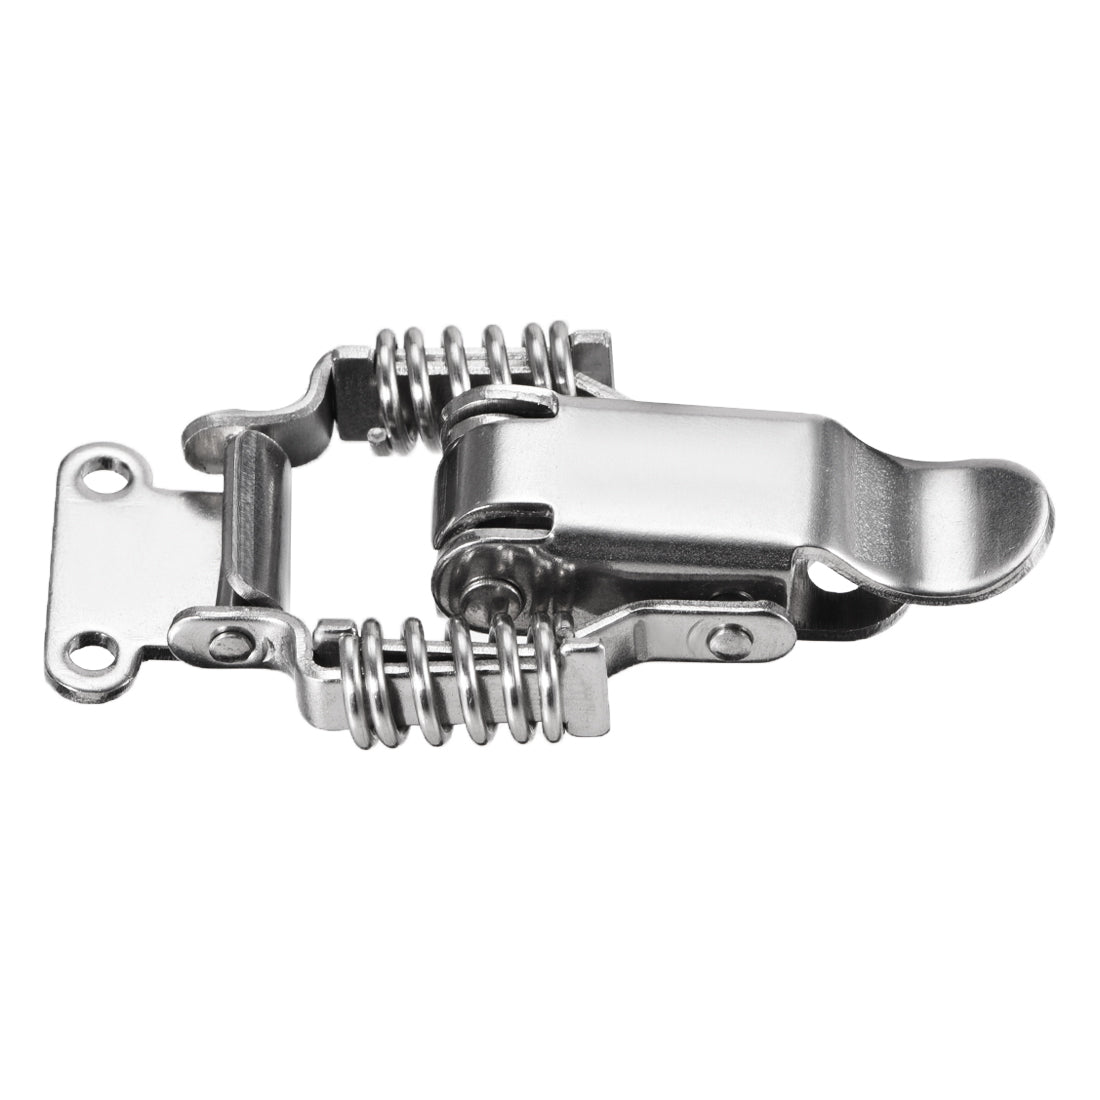 uxcell Uxcell 8pcs 304 Stainless Steel Spring Loaded Toggle Latch Catch Clamp 68mm